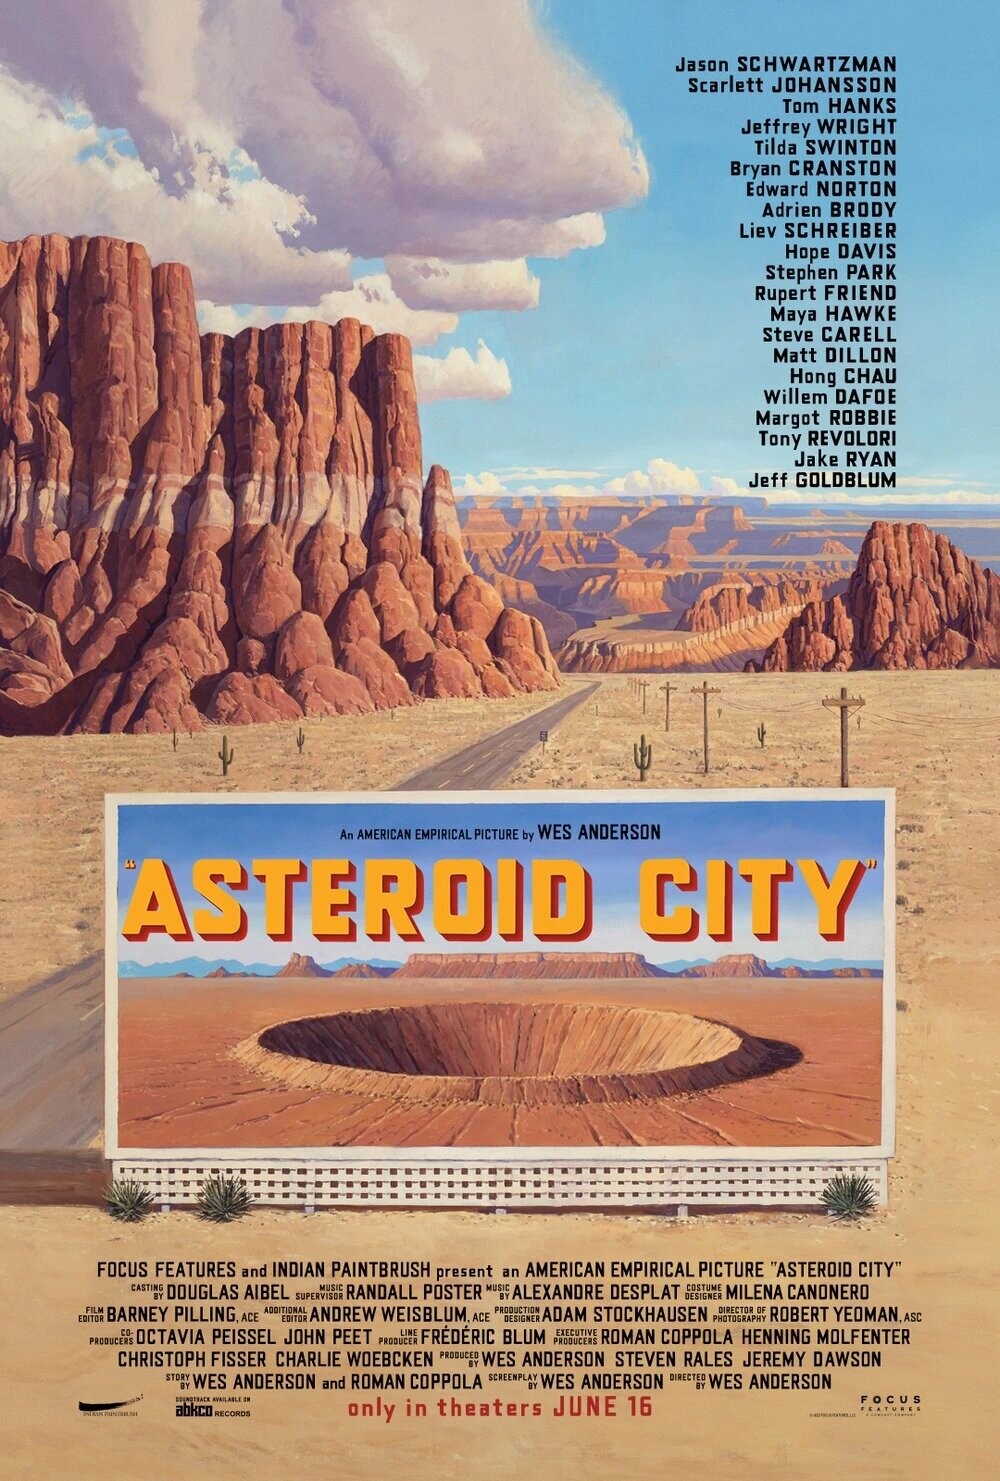 wes-anderson-asteroid-city-poster